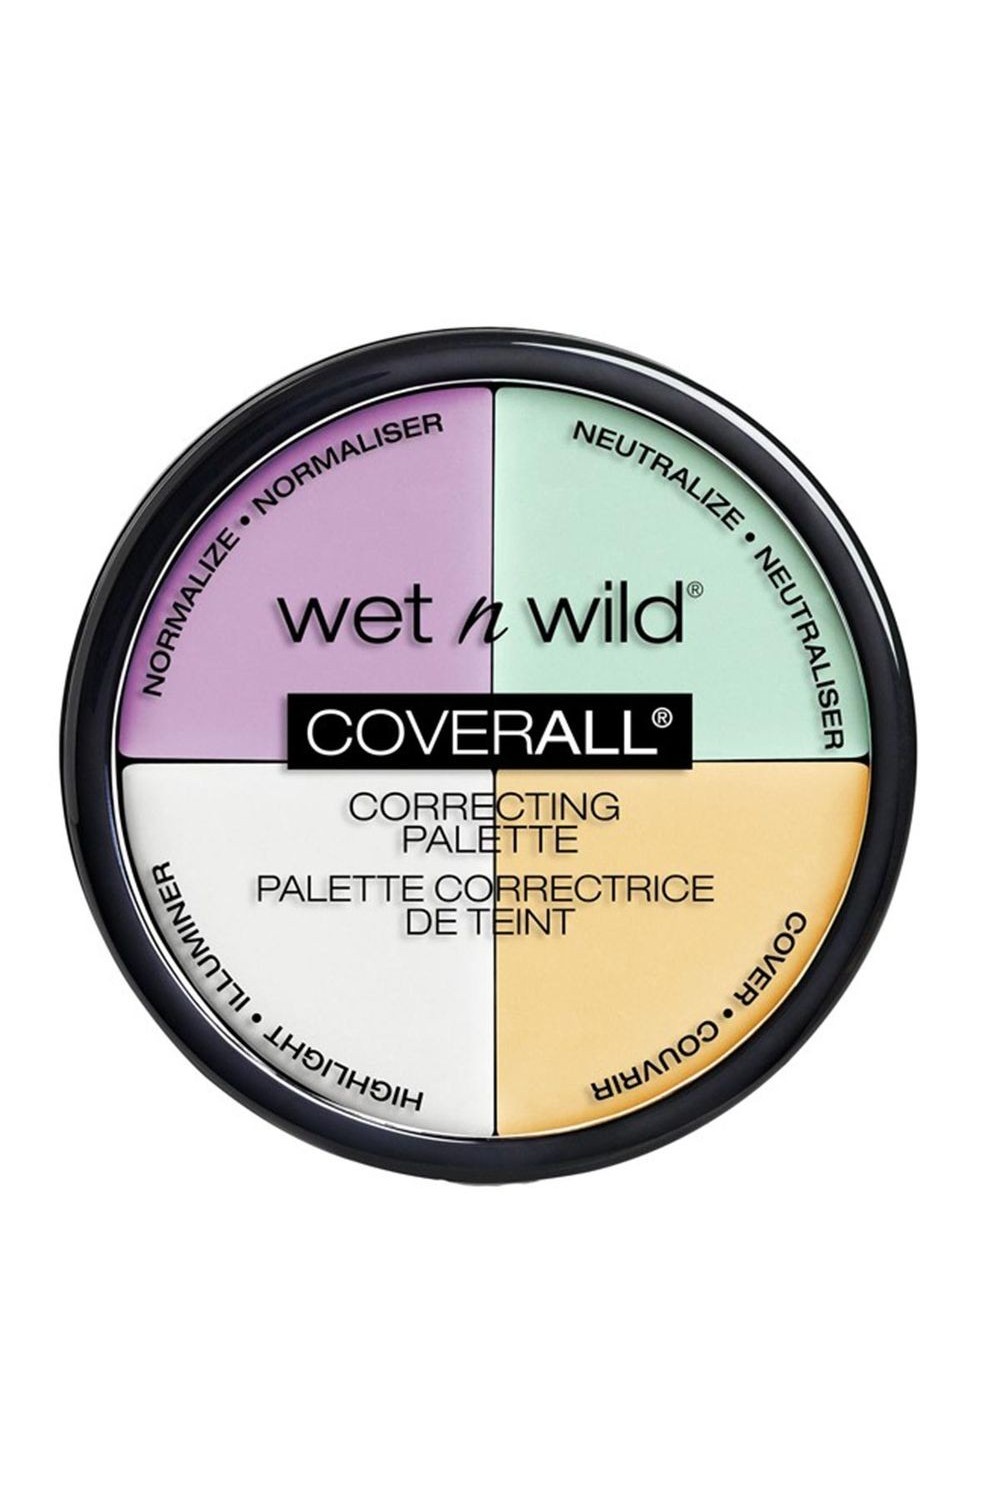 Wet N Wild Coverall Correcting Palette